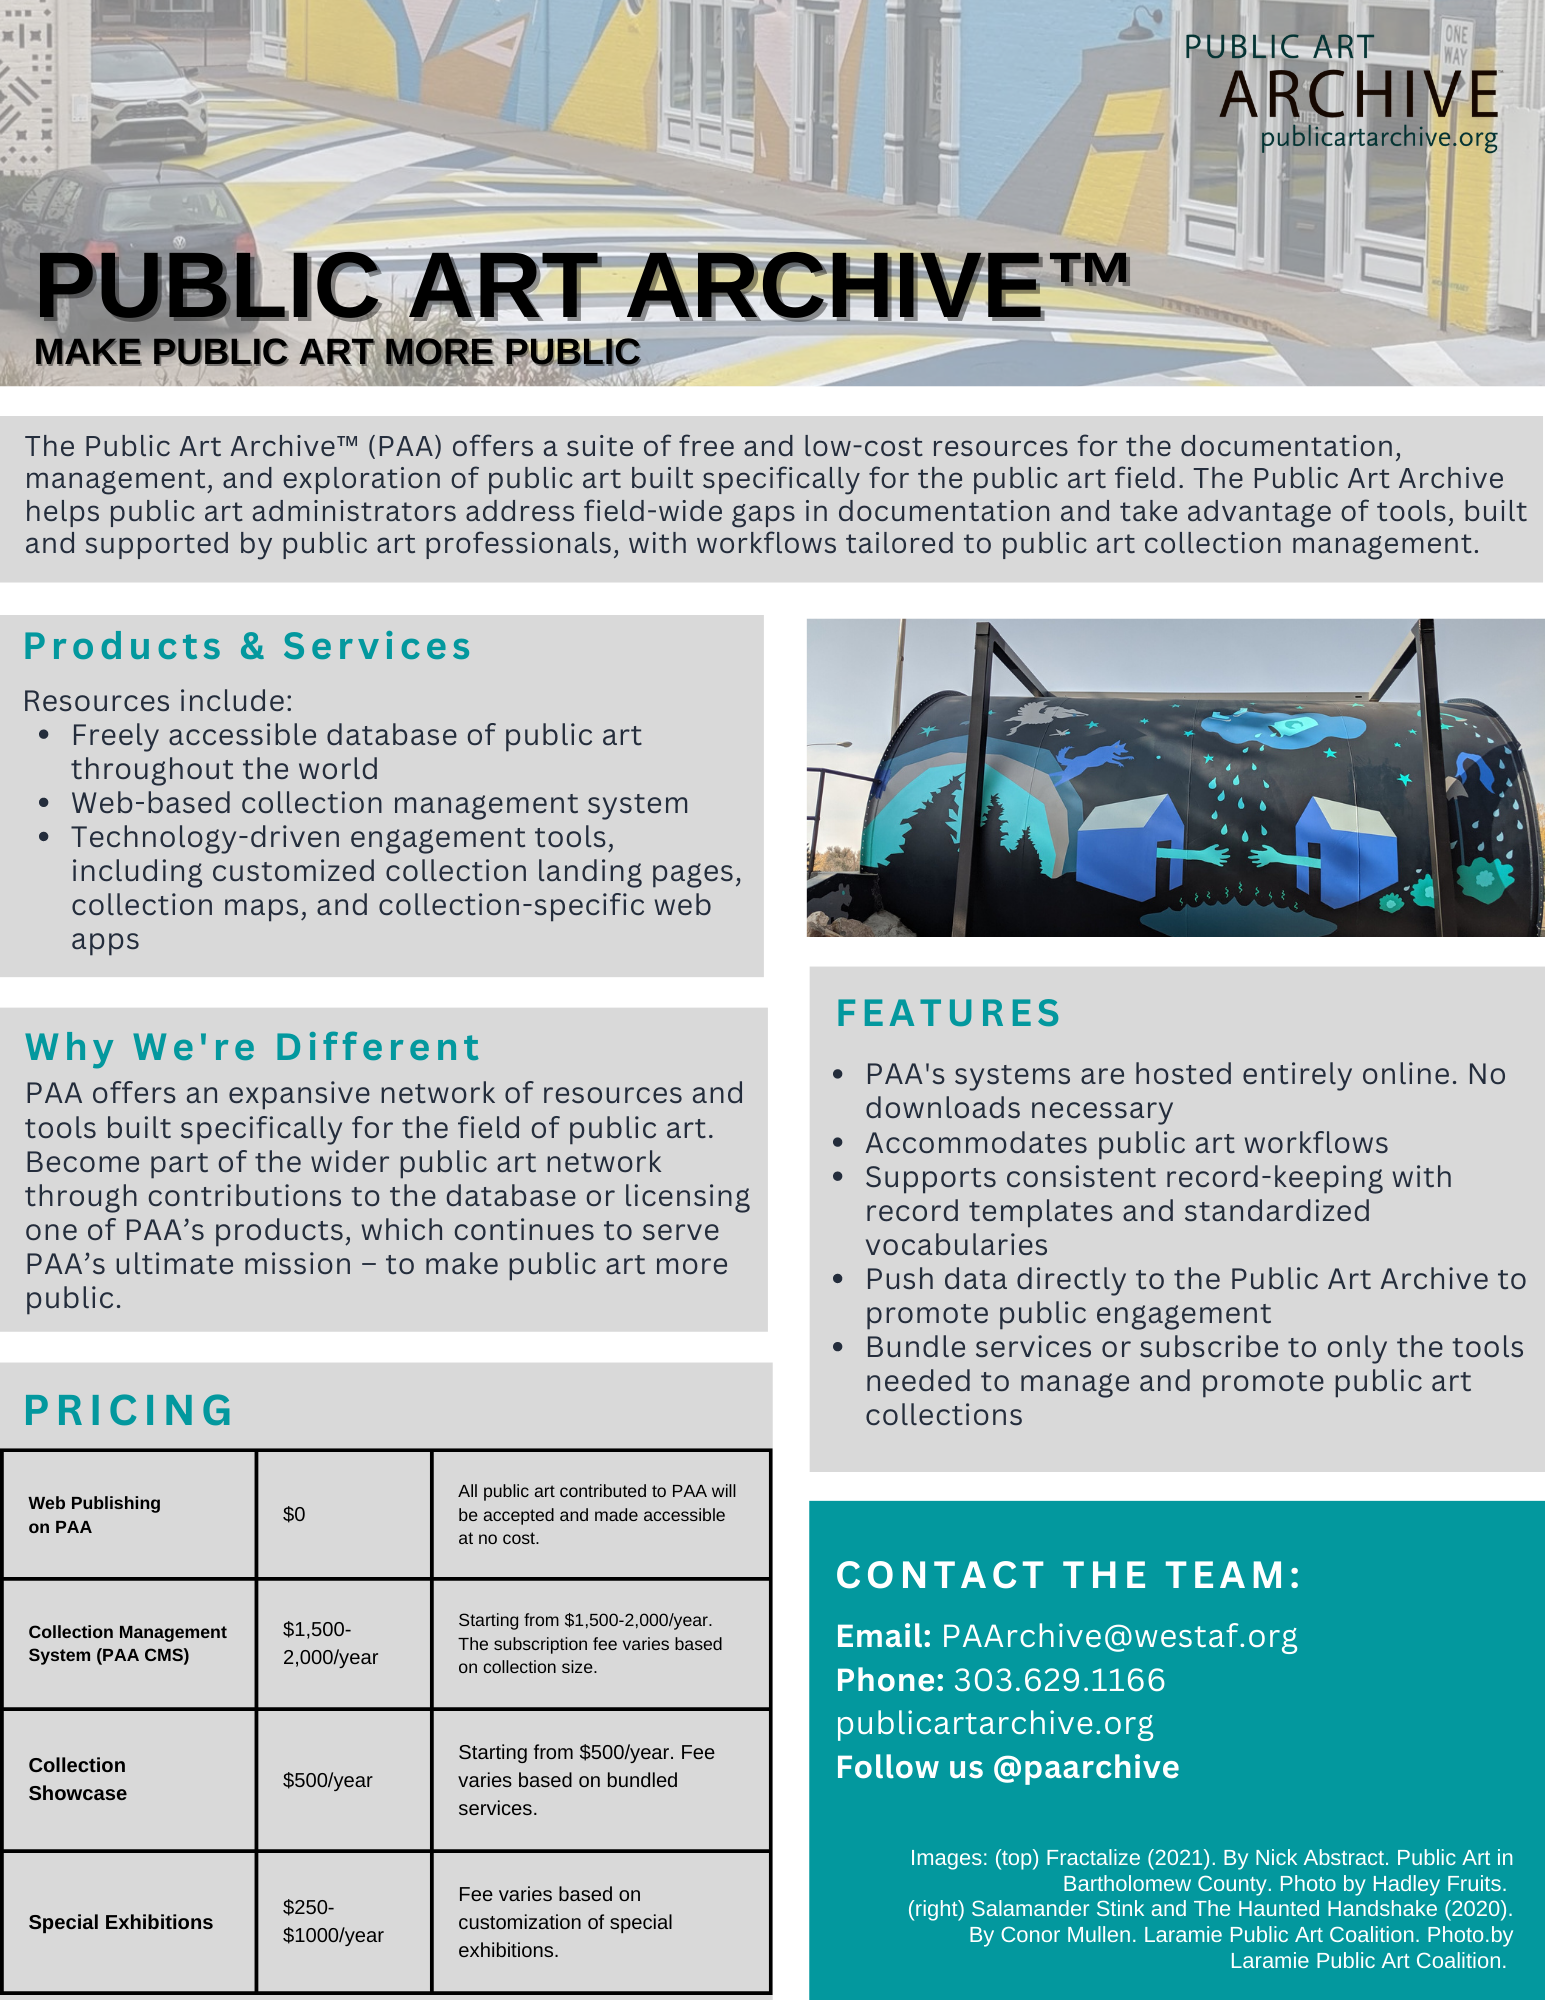 Do you know about ALL that the Public Art Archive offers?